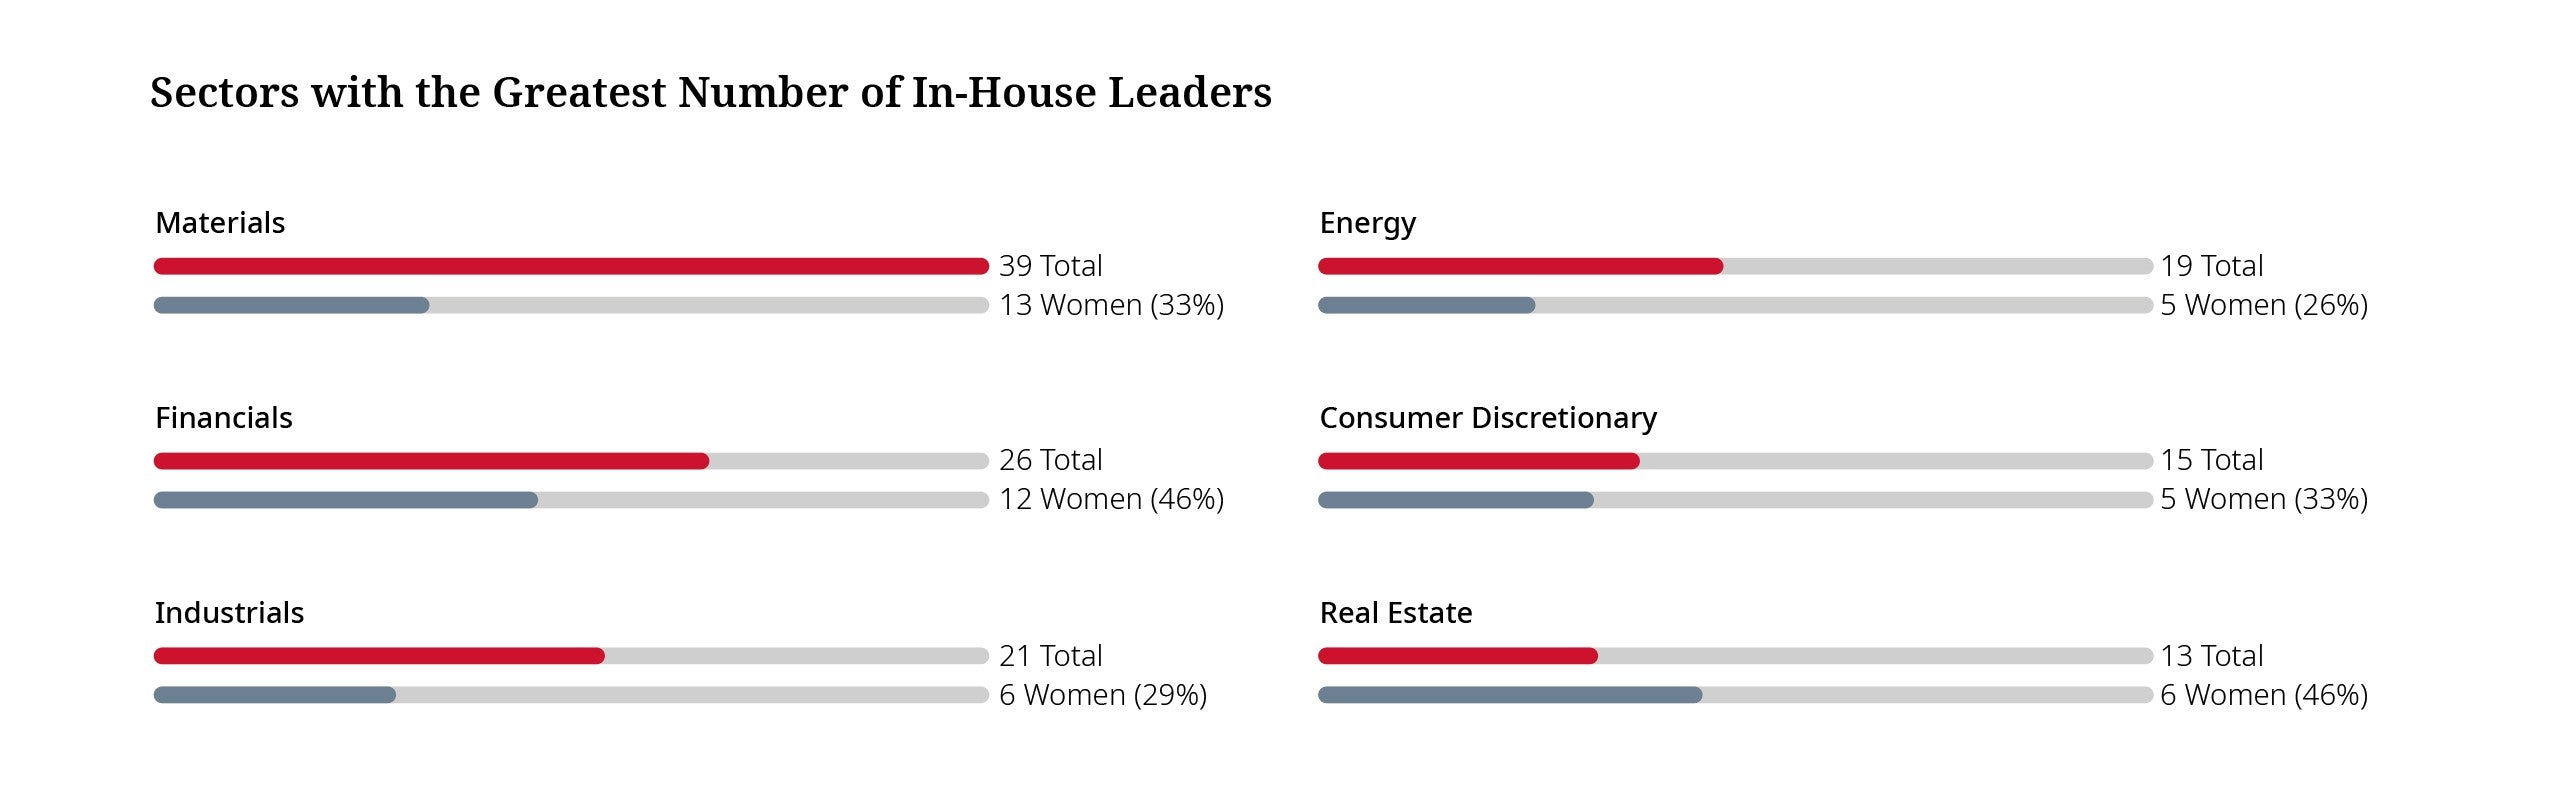 Sectors with greatest number of in-house leaders